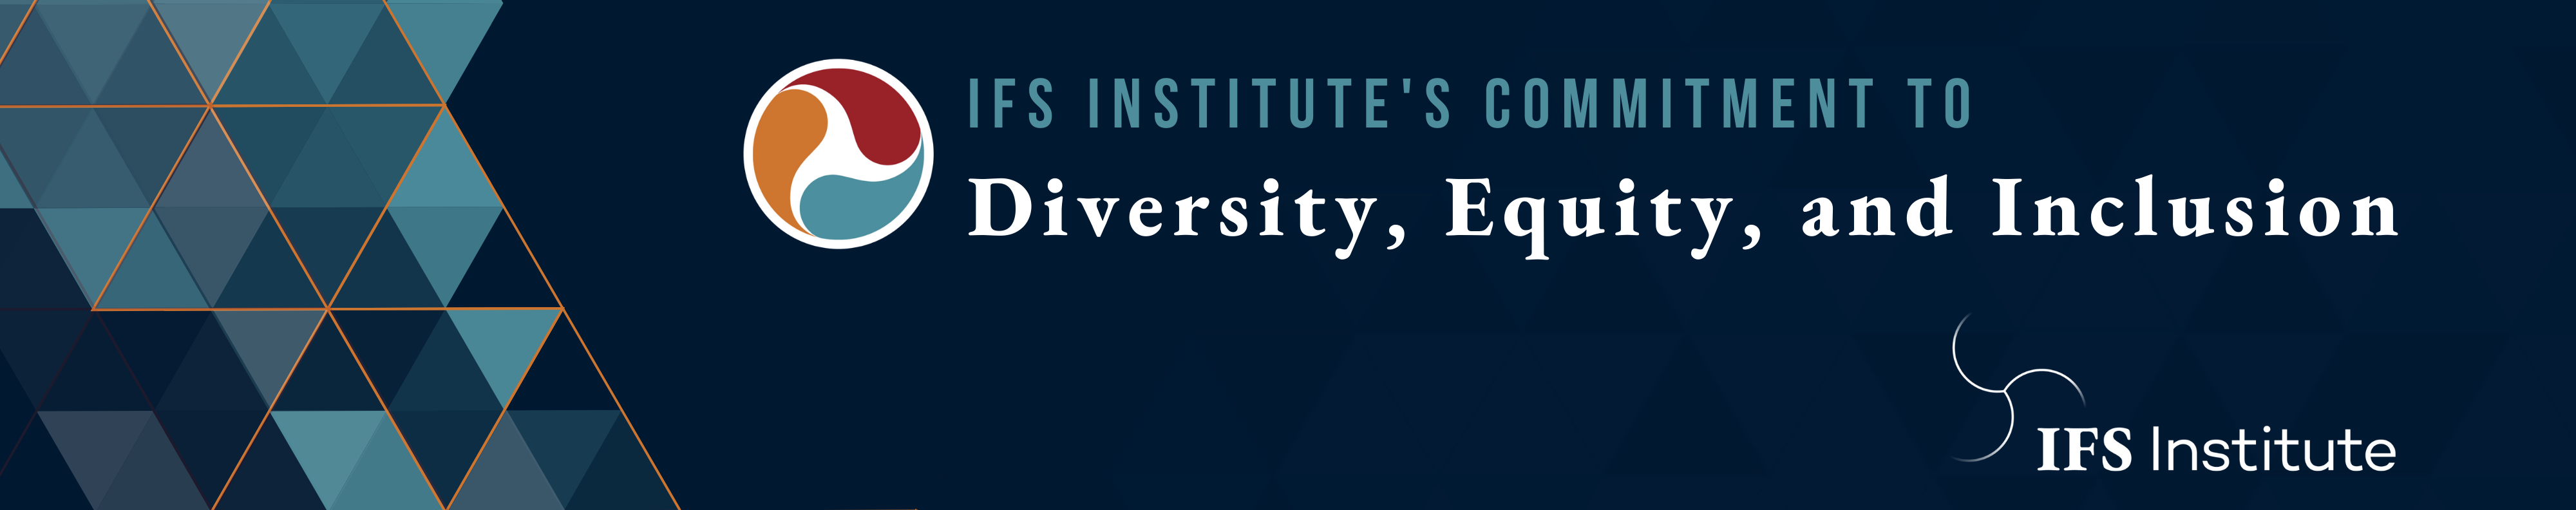 Navy rectangle banner with triangle pattern in lighter blues text says IFS Institute's Commitment to Diversity, Equity, and Inclusion with a white IFSI logo